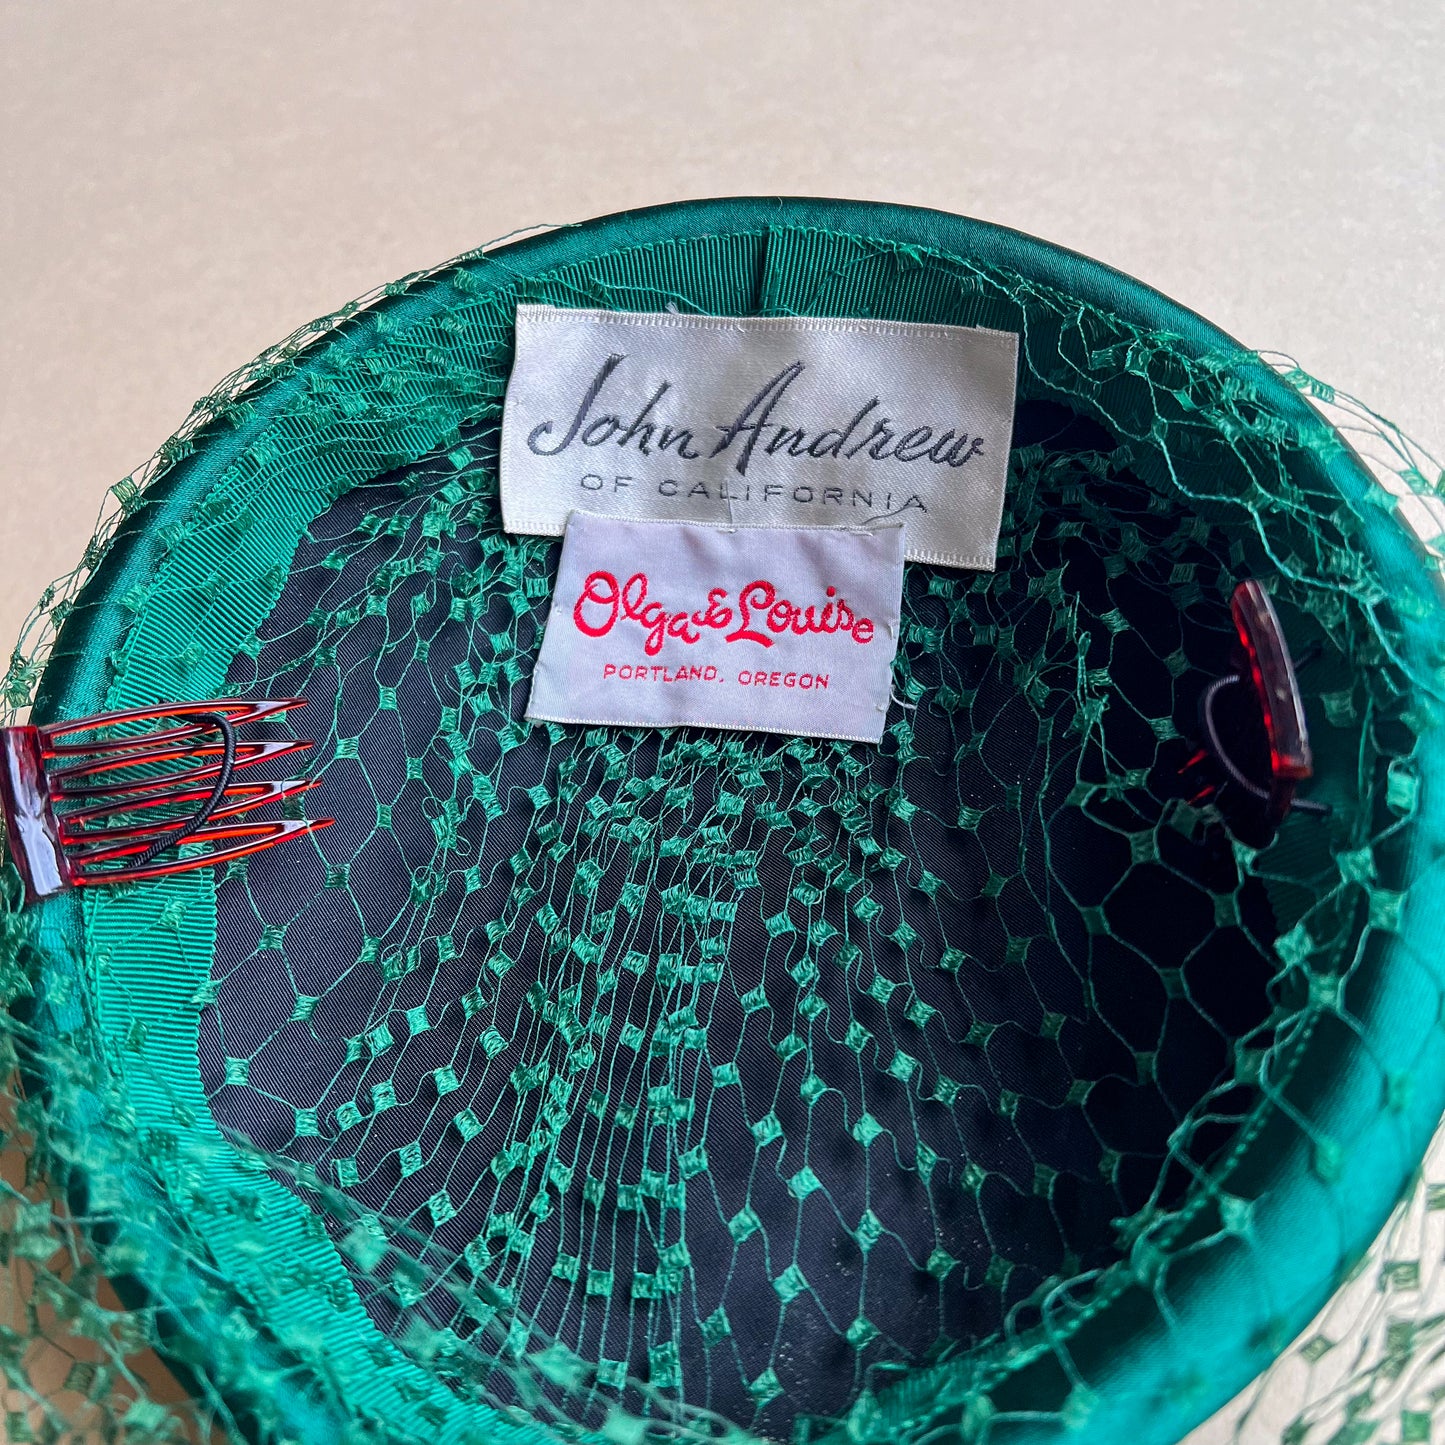 Fabulous 1960s Emerald Green Silk Hat With Netting